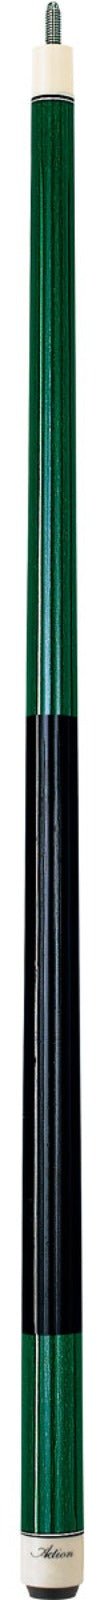 Action Action STR02 - Green Pool Cue Pool Cue